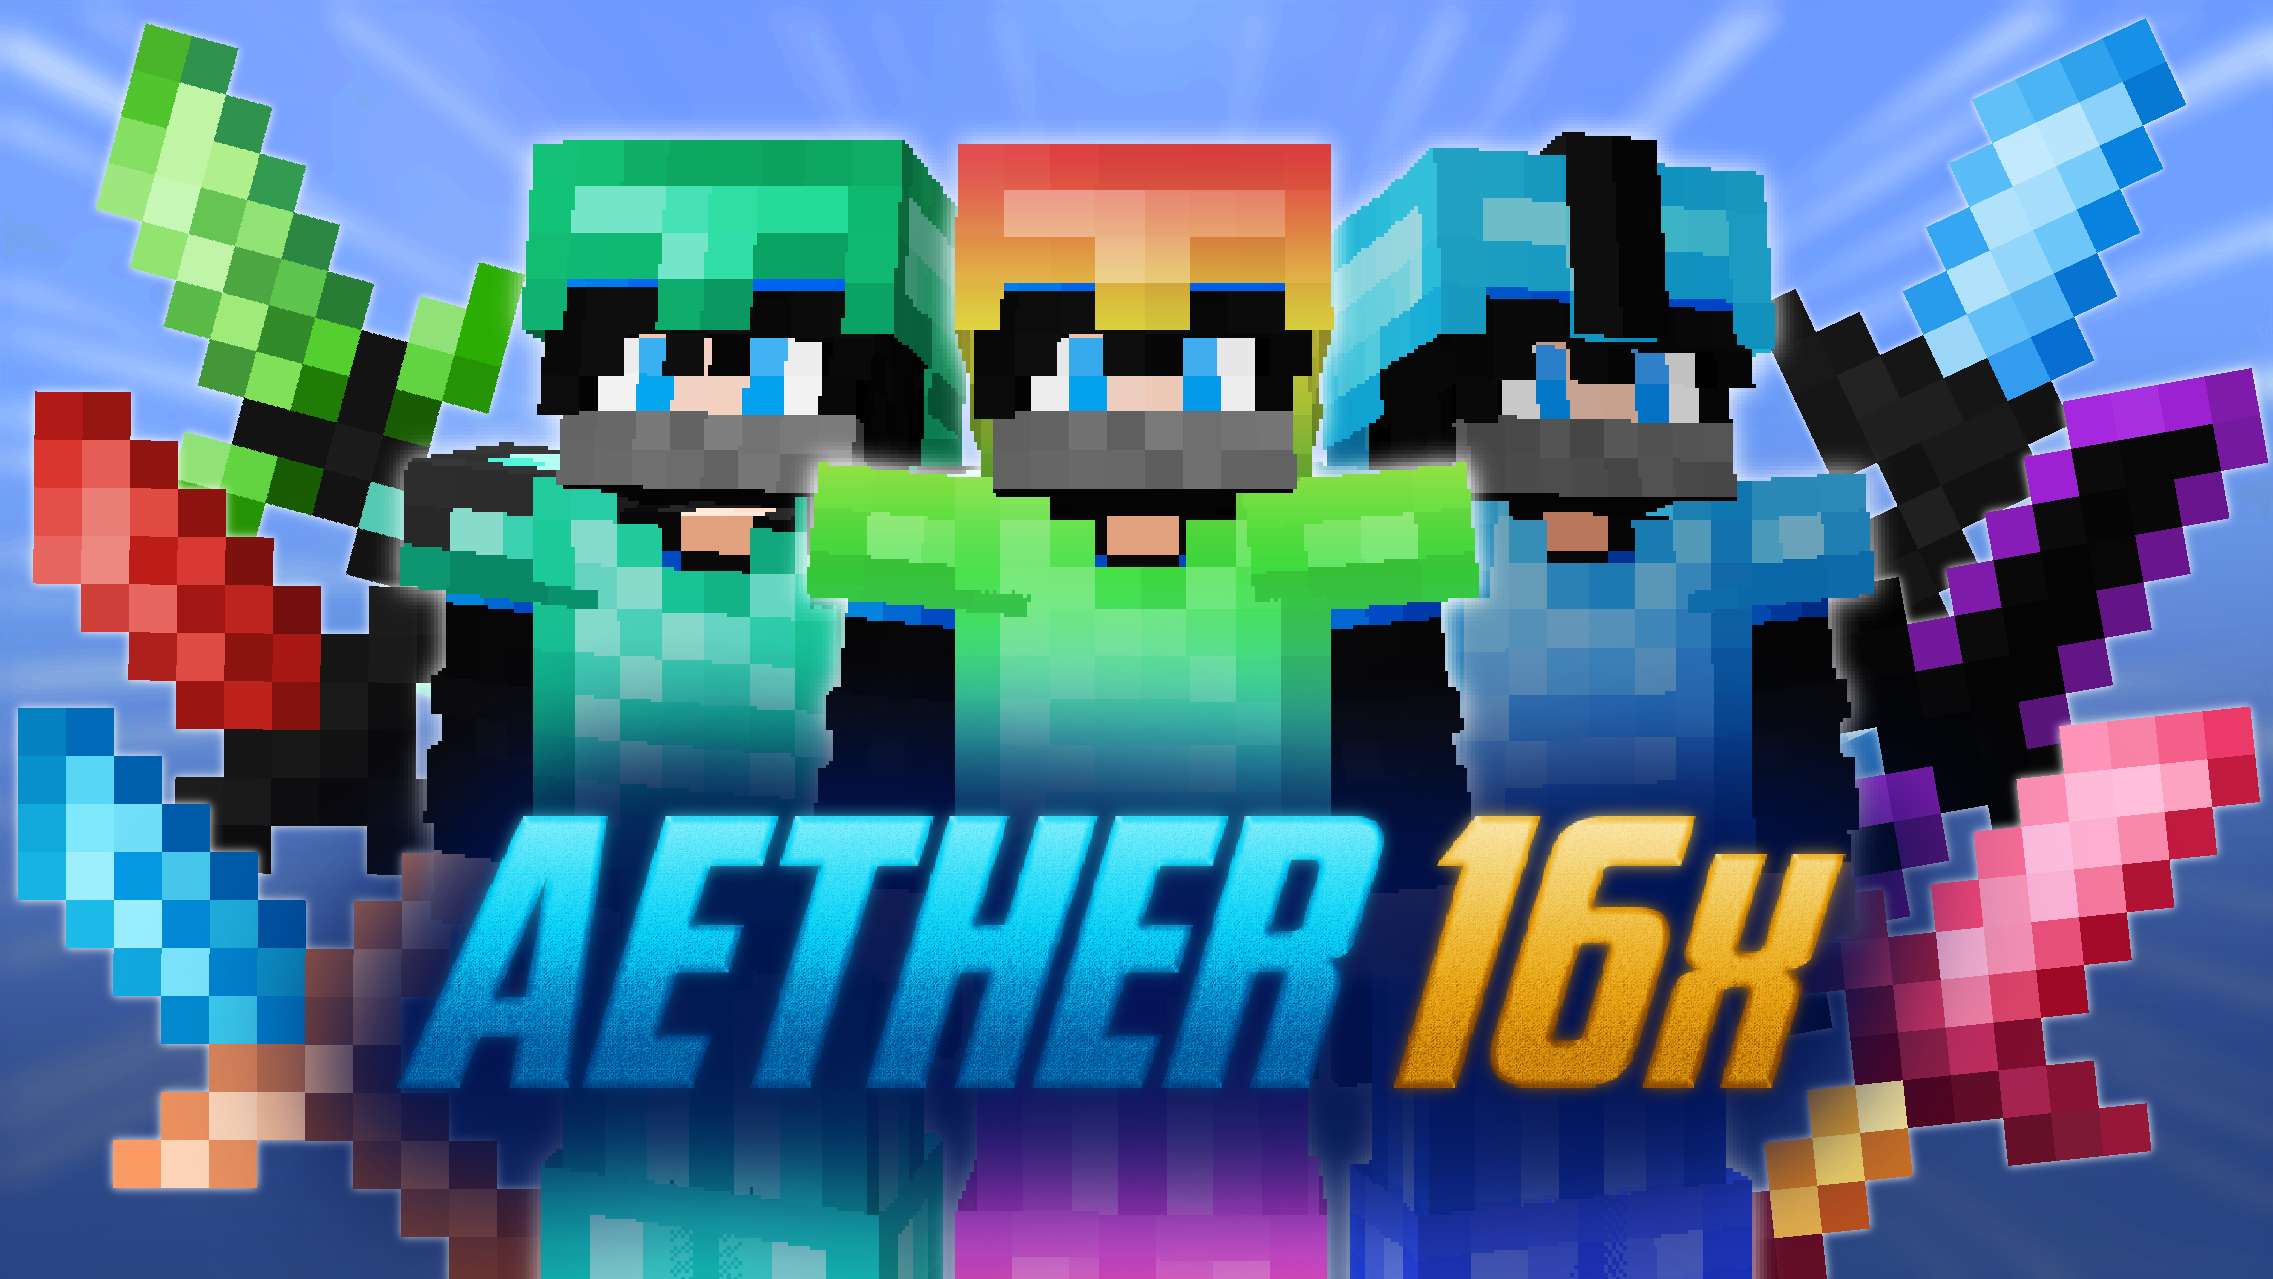 Aether 16x [Mixabletub] 16x by Mqryo on PvPRP